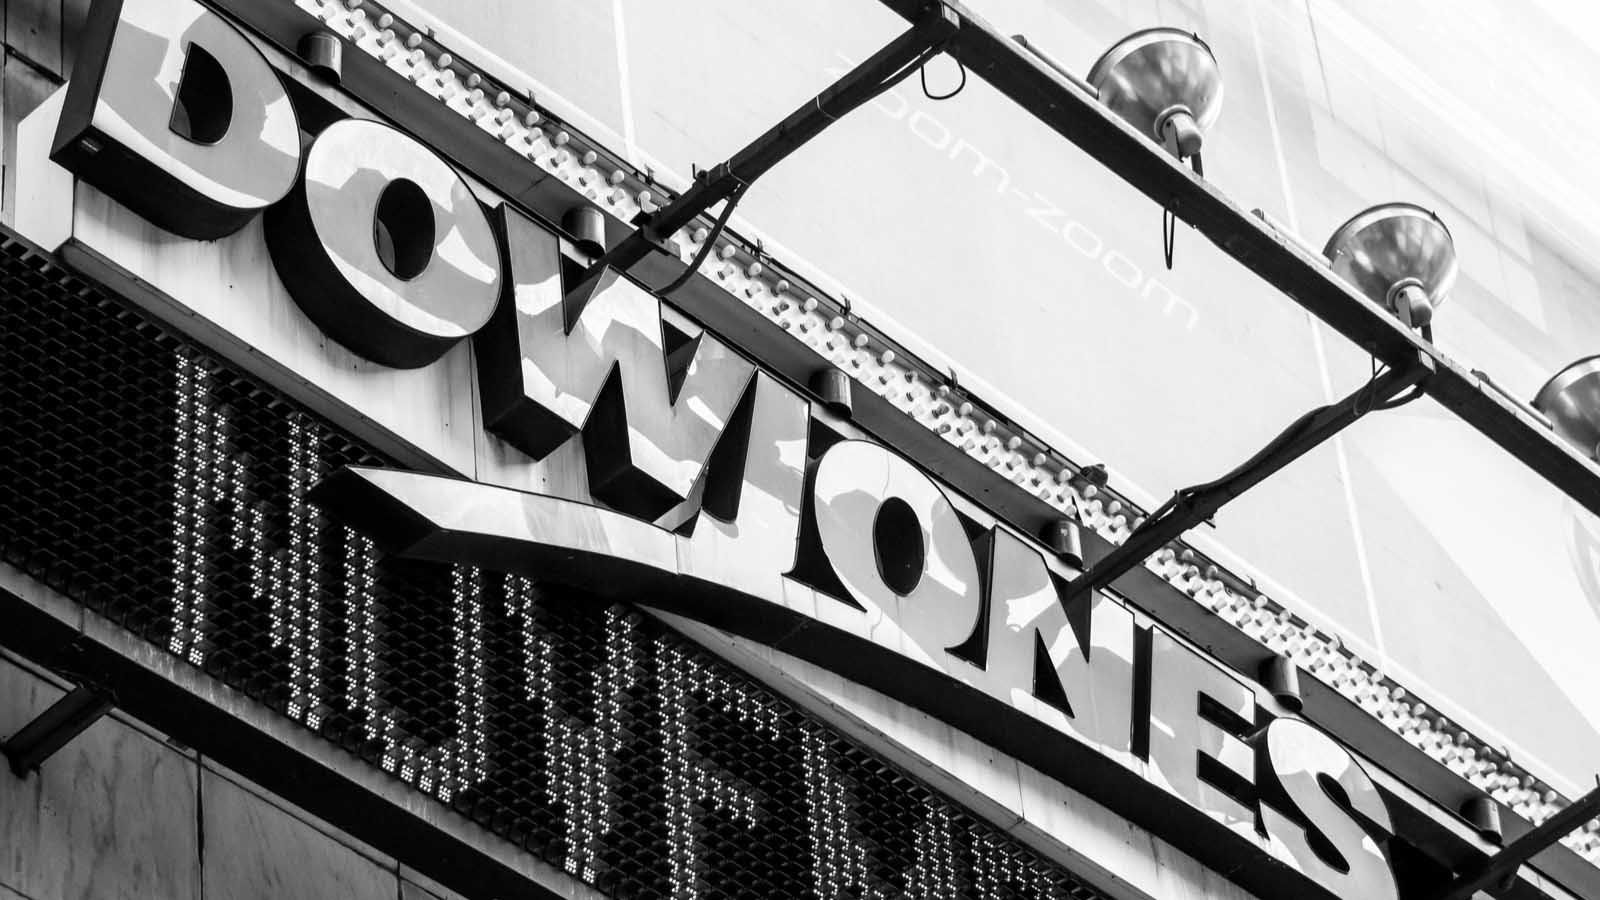 3 Dow Jones stocks to buy and sell after earnings